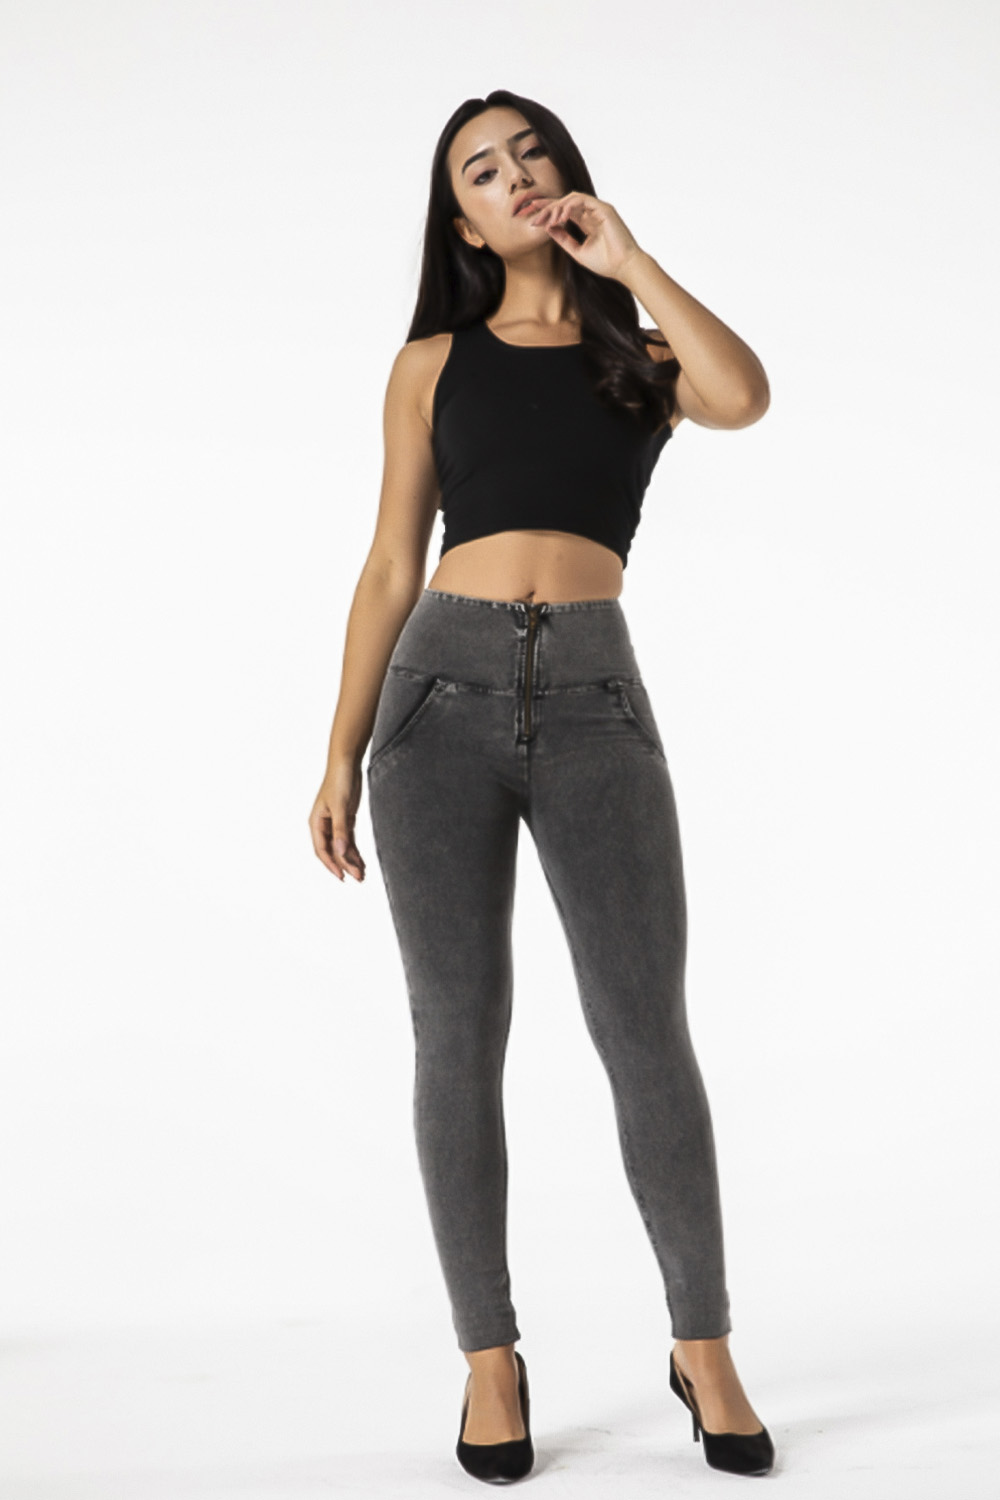 Grey push up jeans - leggings with zipper